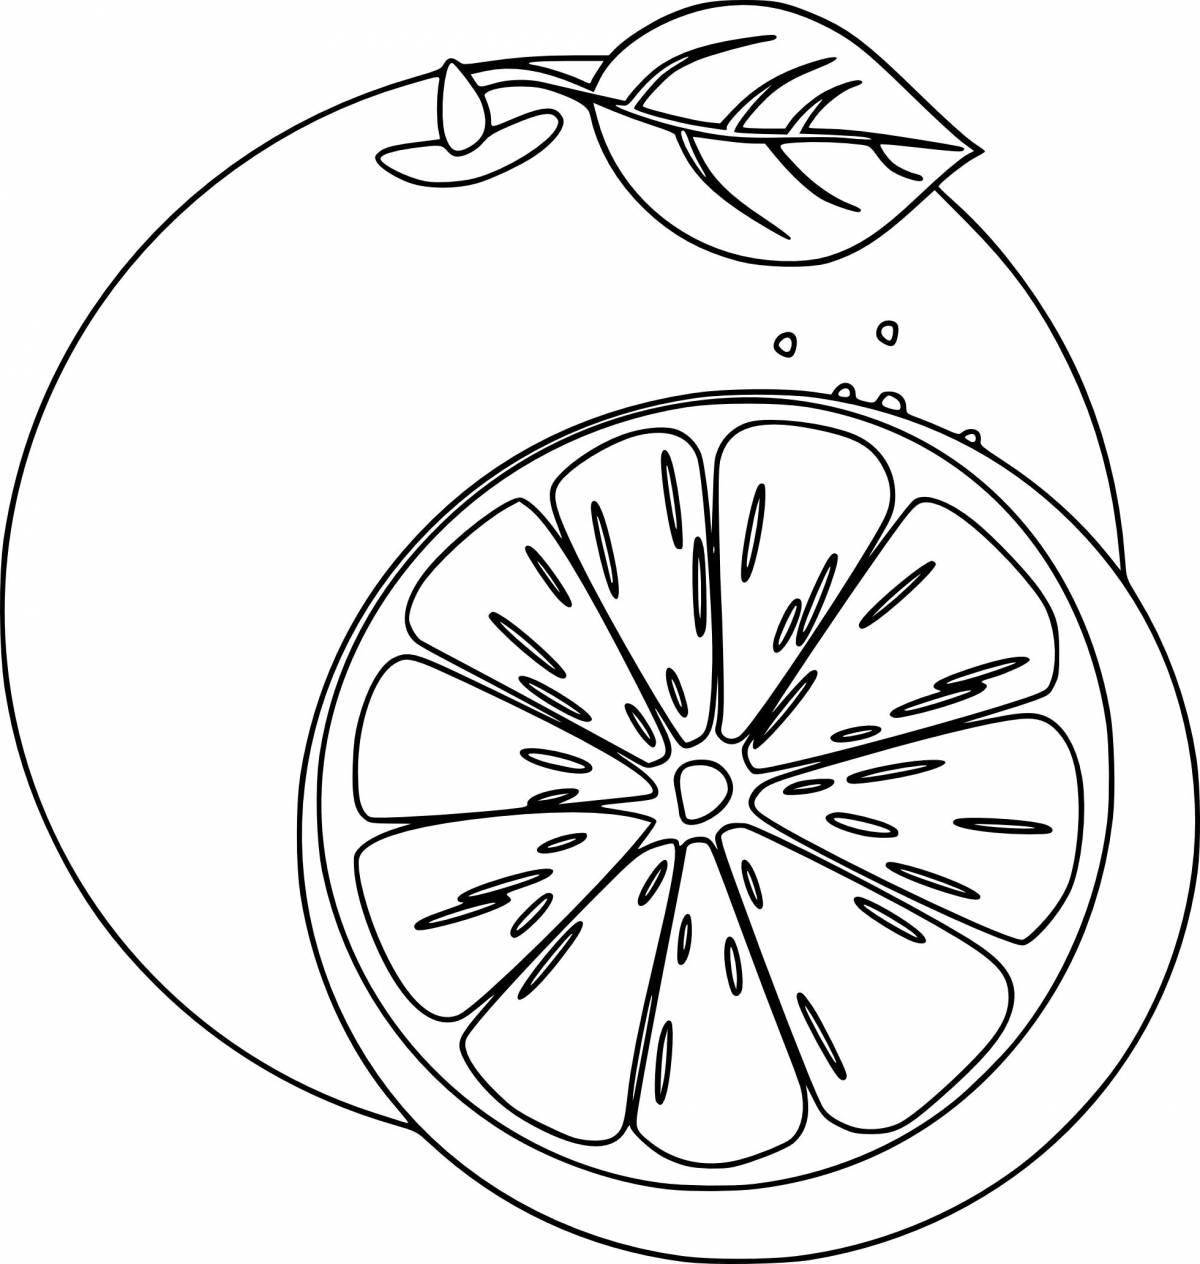 Sunny tangerines and oranges coloring page